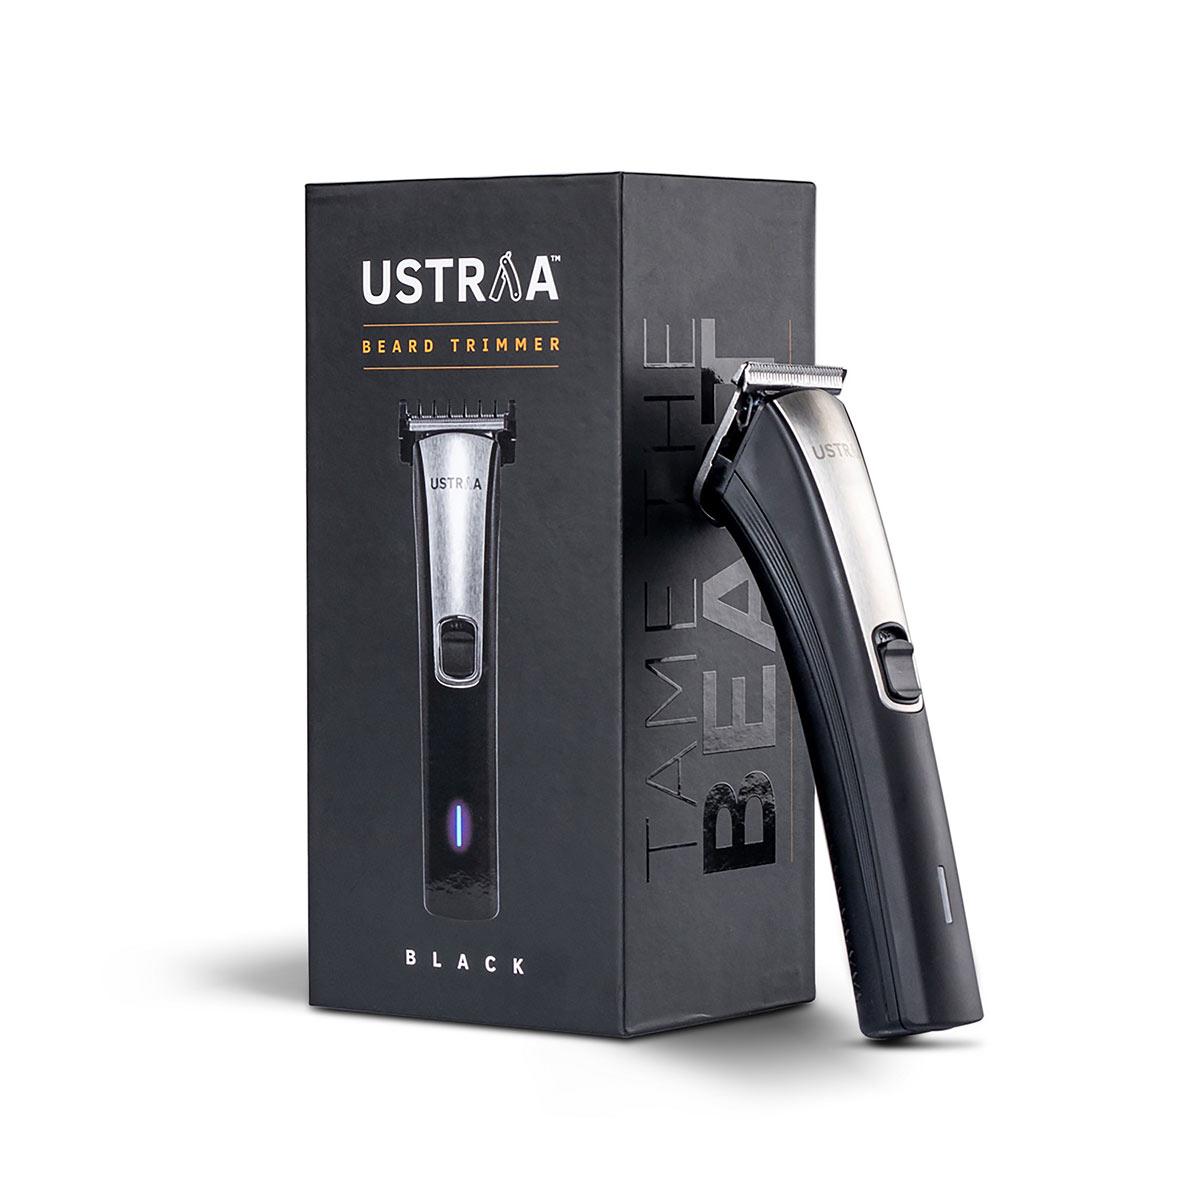 Ustraa Black Beard Trimmer for Men, Lithium Ion Powered Trimmers with that works as Hair Clippers, 2 Year Warranty